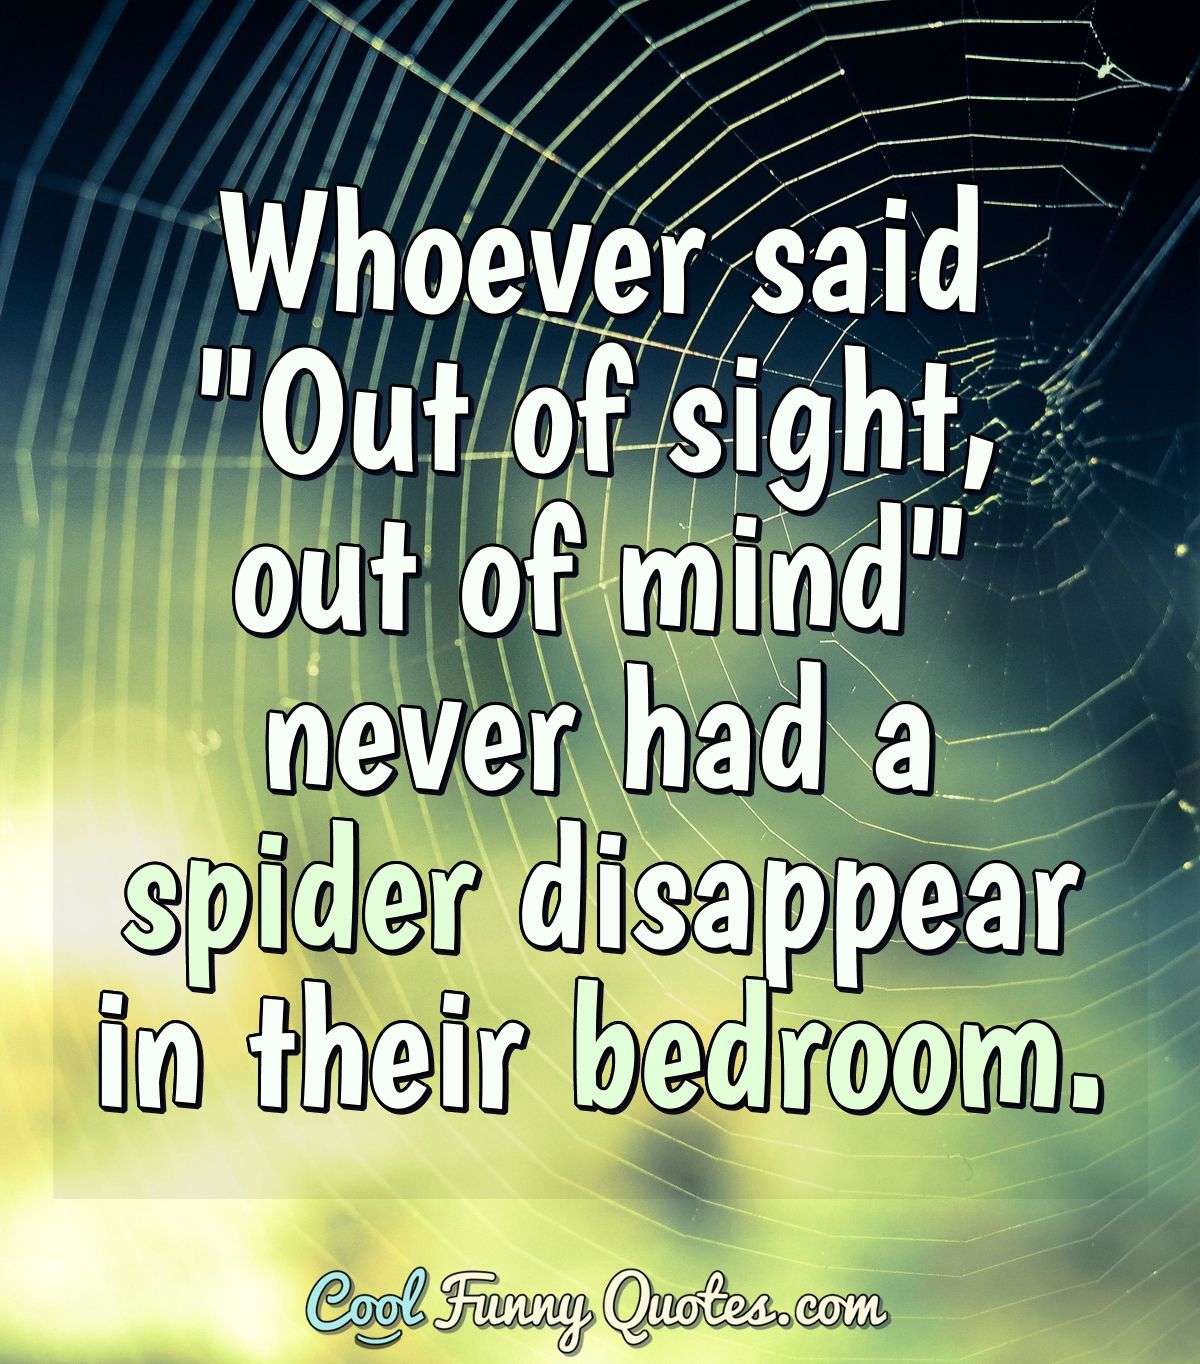 Whoever said "Out of sight, out of mind" never had a spider disappear in their bedroom. - Anonymous